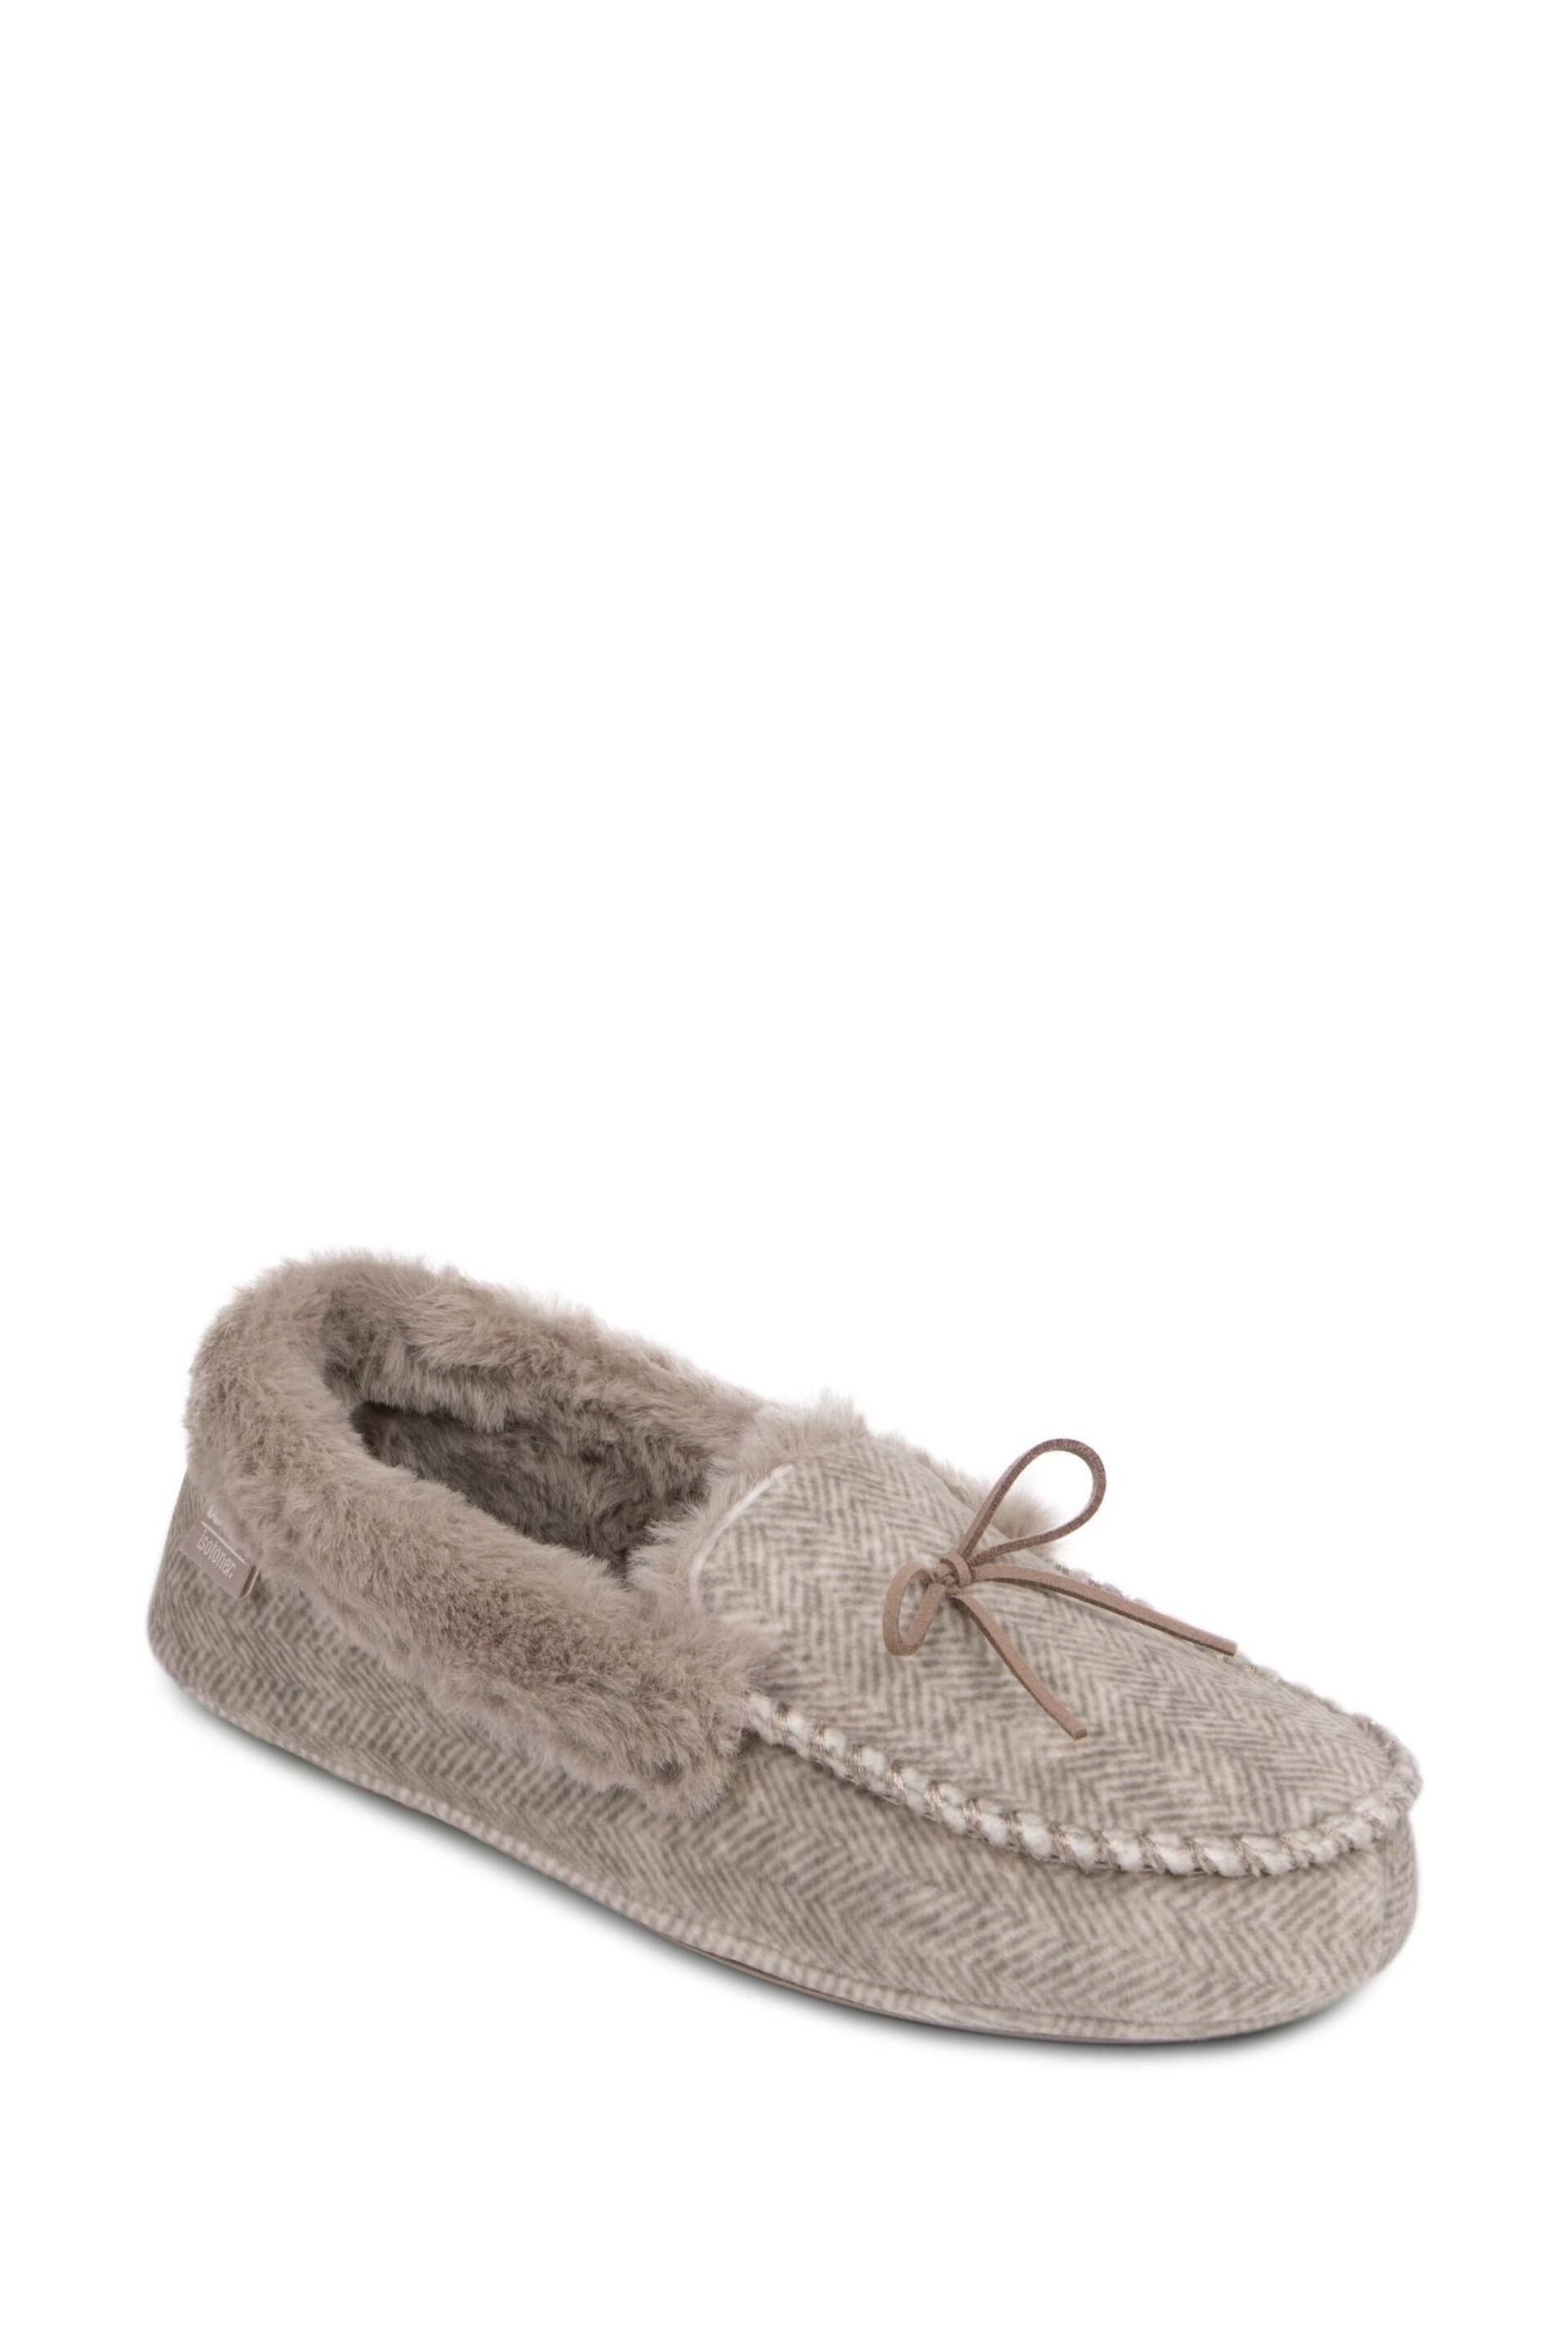 Totes Pink Ladies Herringbone Velour Moccasin With Faux Fur Cuff & Bow Detail - Image 3 of 5